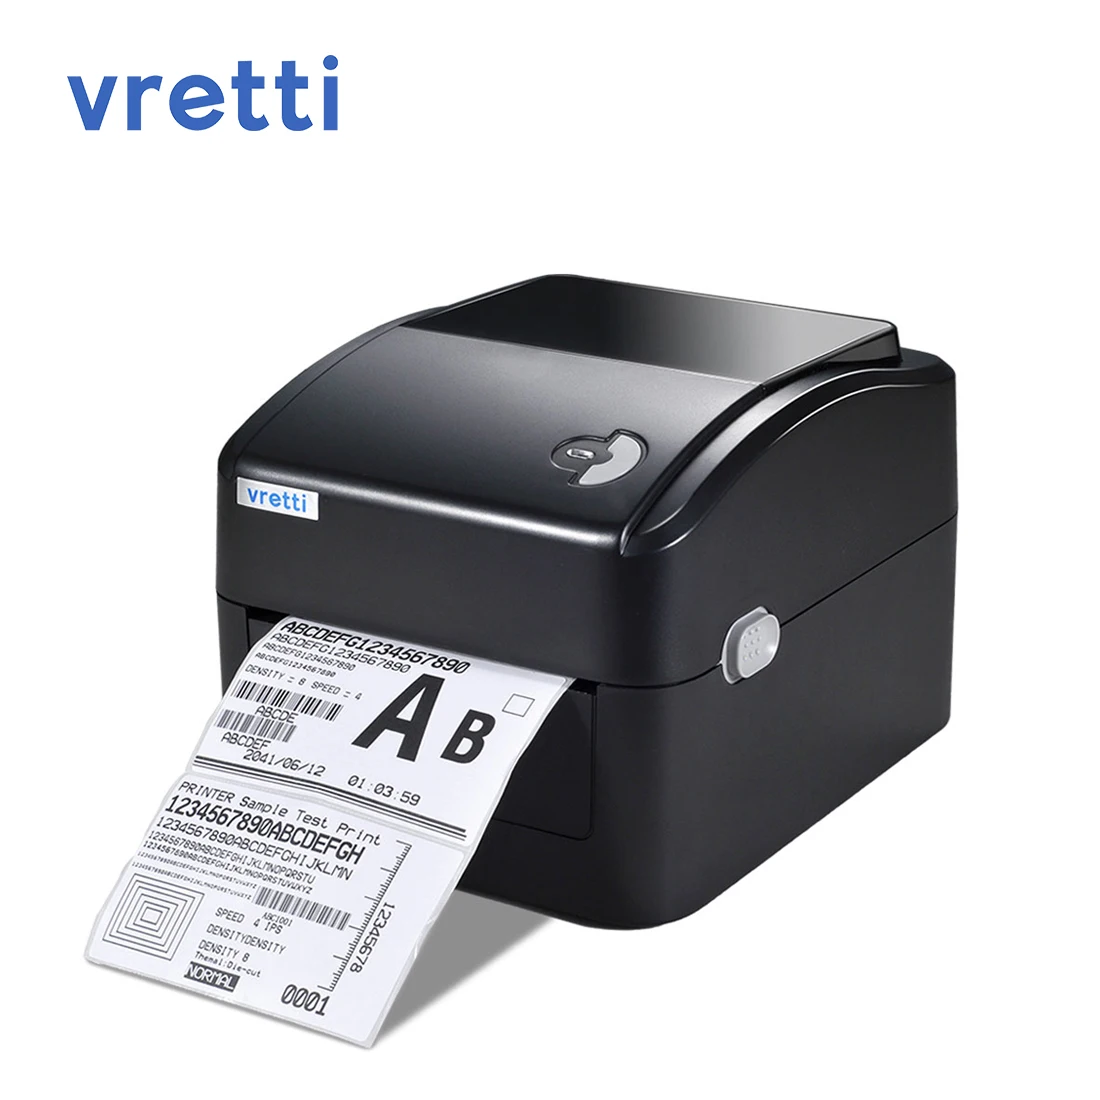 

Best selling 4 inch direct thermal label printer support mobile phone wireless connection